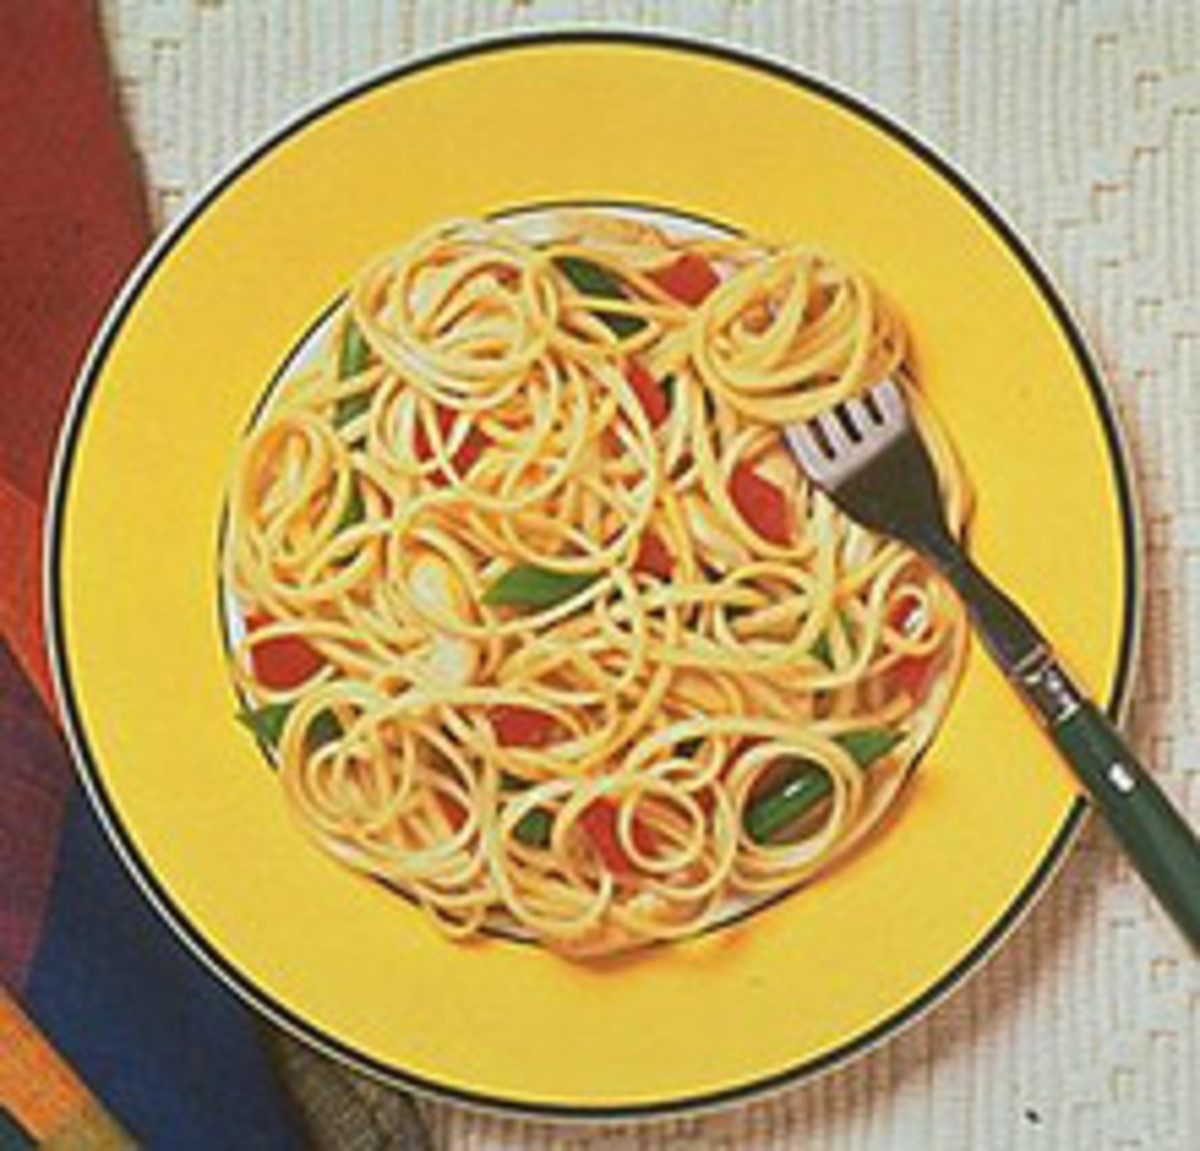 Linguine with Grilled Vegetables and Herb Bread Crumbs